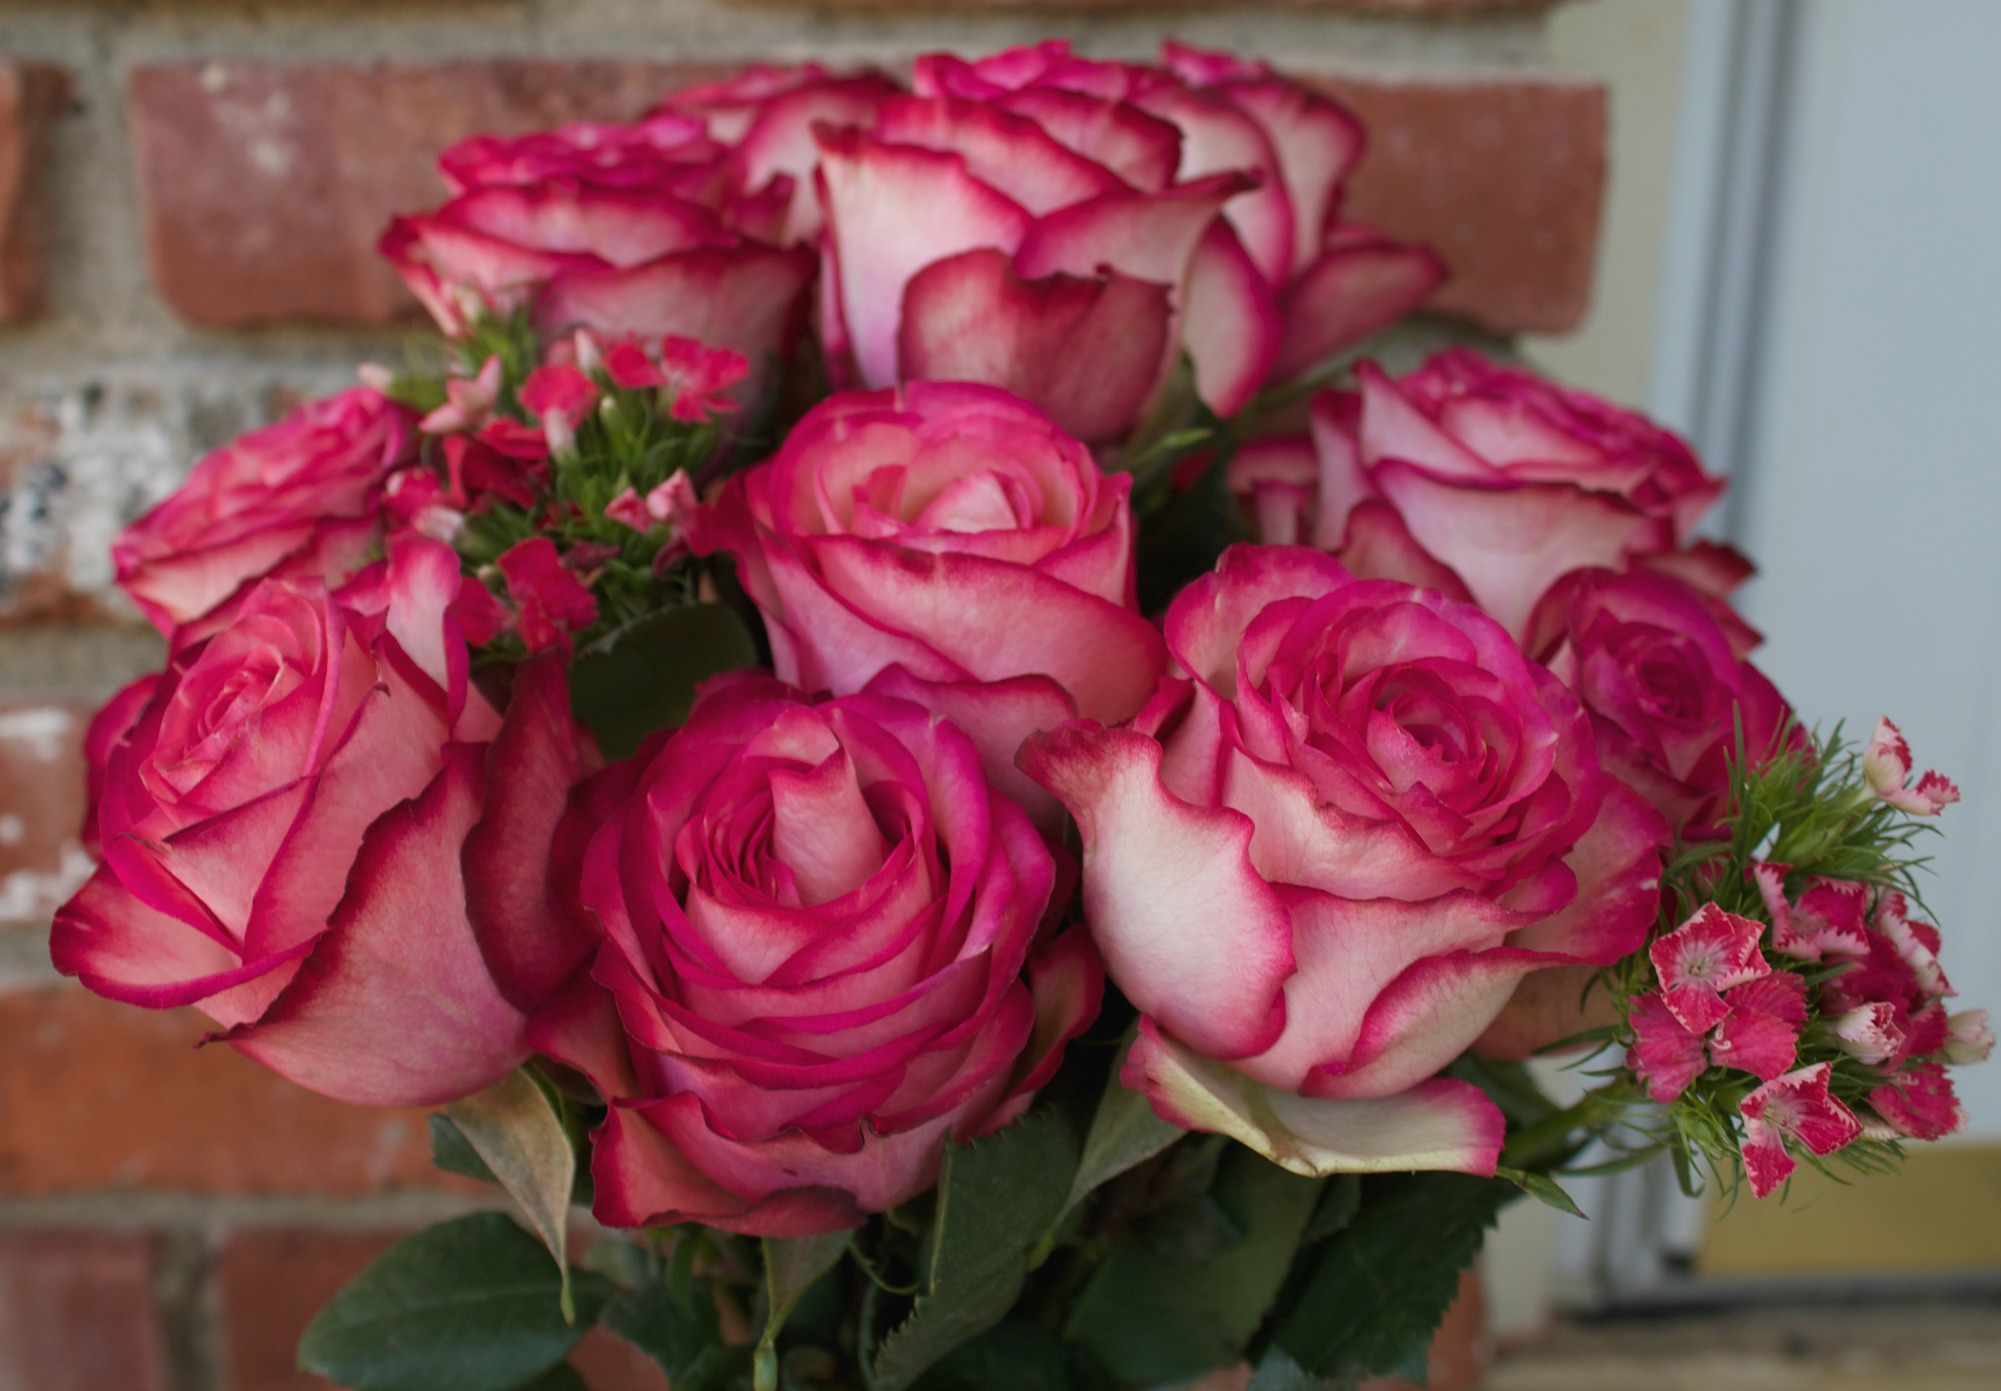 Bouquet of flowers and roses delivered to your home by Bouq